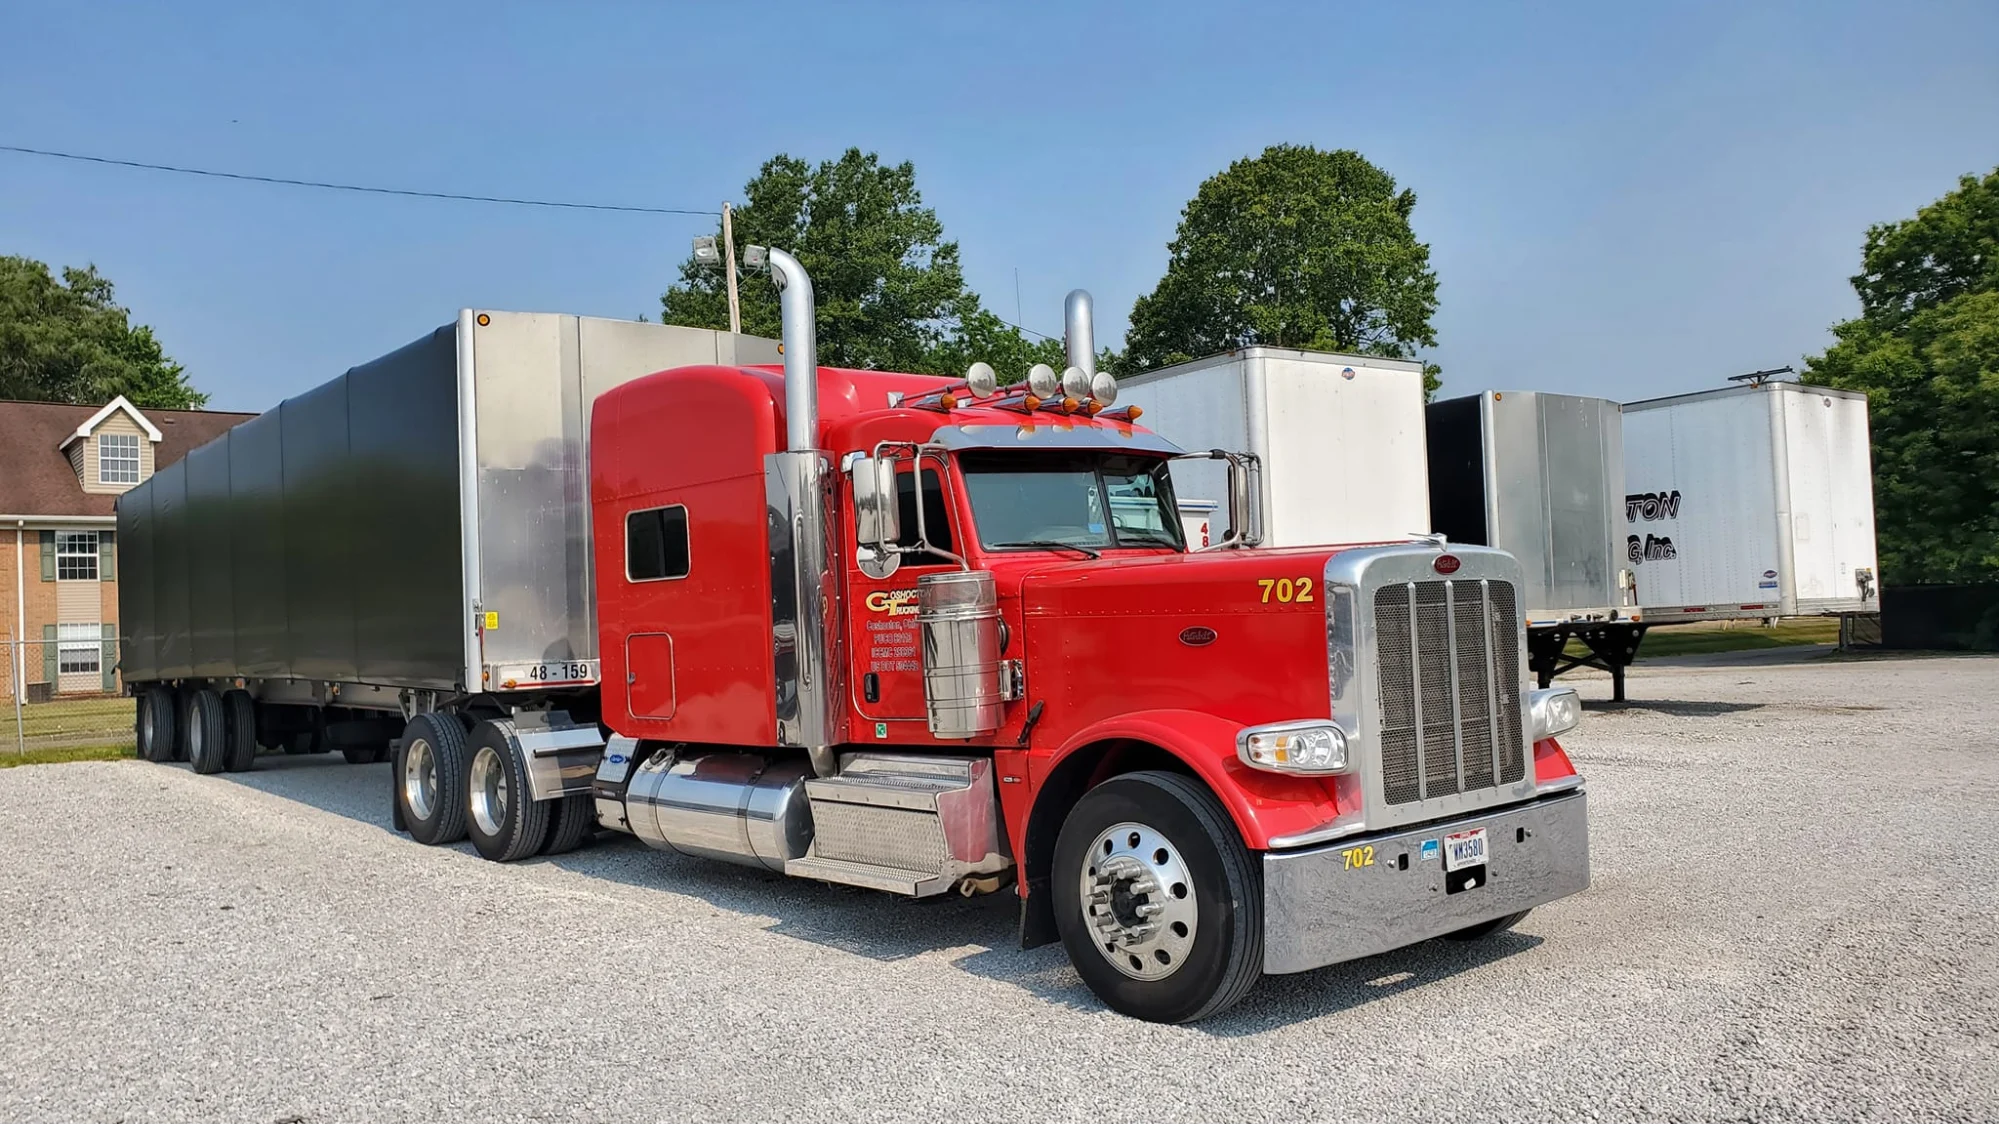 Coshocton Trucking saved $650K+ in insurance and fuel costs